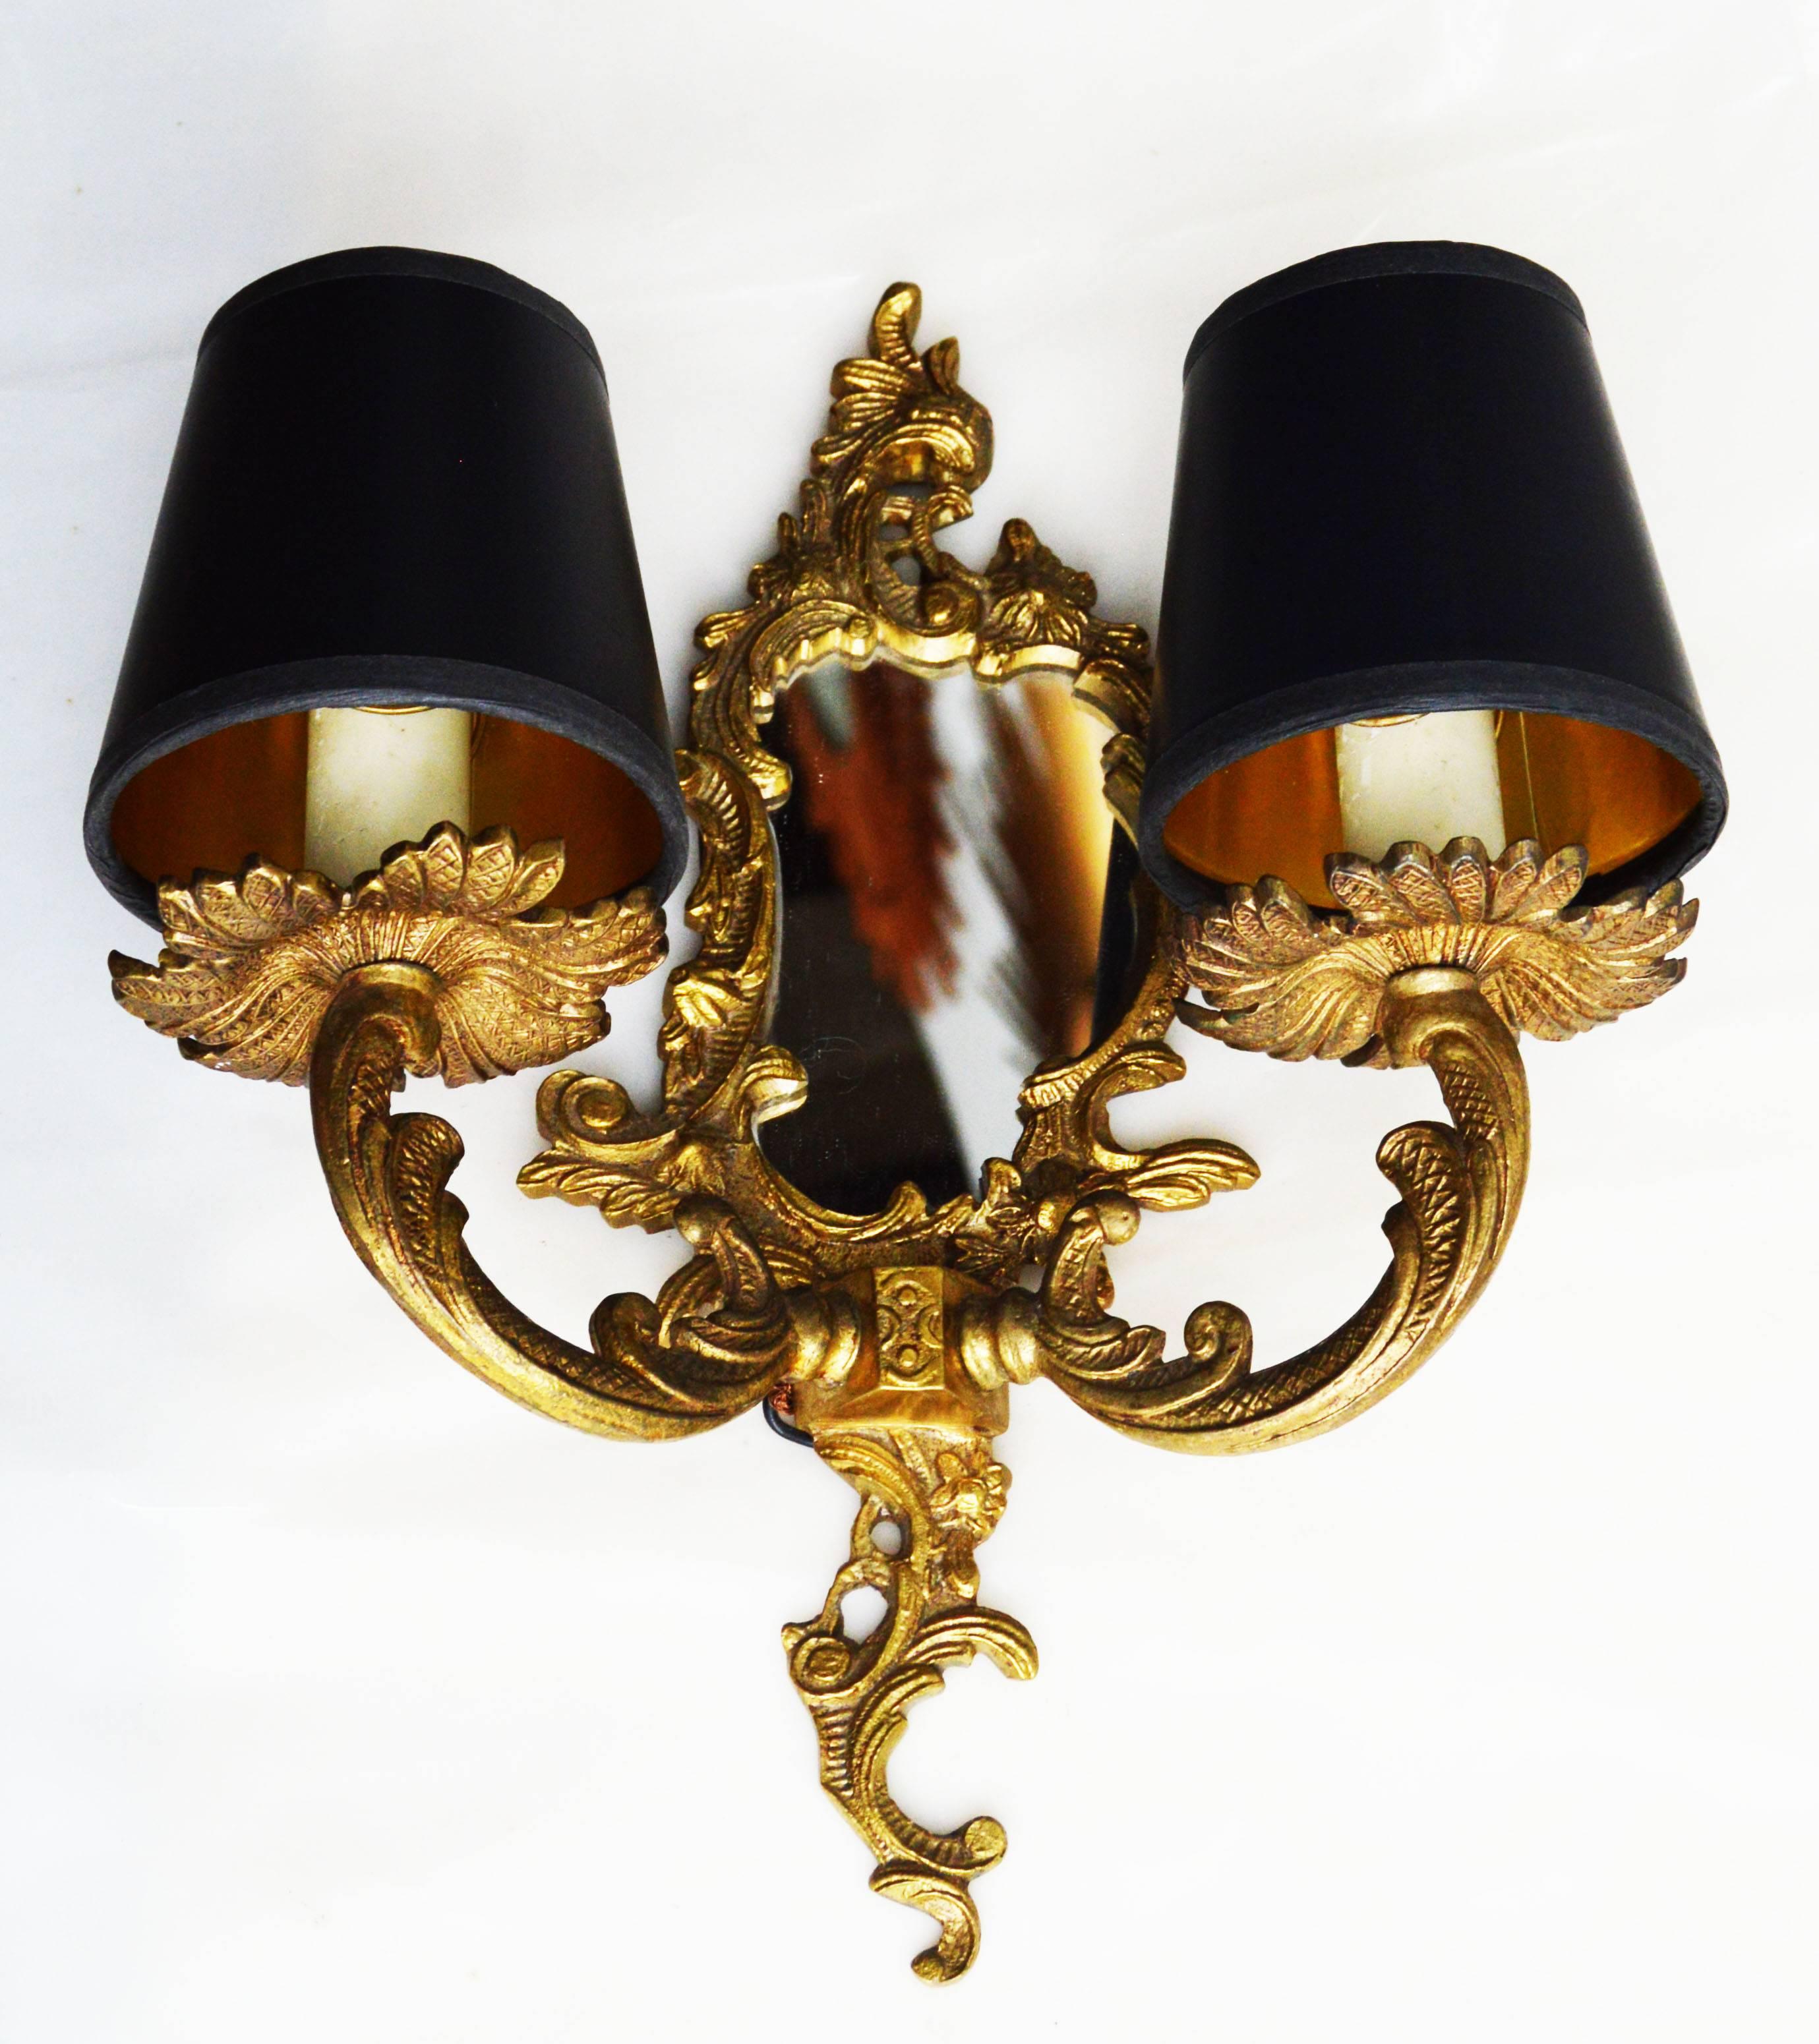 Pair of French Louis XV Rocaille style bronze pair of sconces with mirror.
Wired for US and in working condition.
Shades not included.
Measures: Mirror: 4" H.
Projection from the wall: 5".
Have a look on our impressive collection of